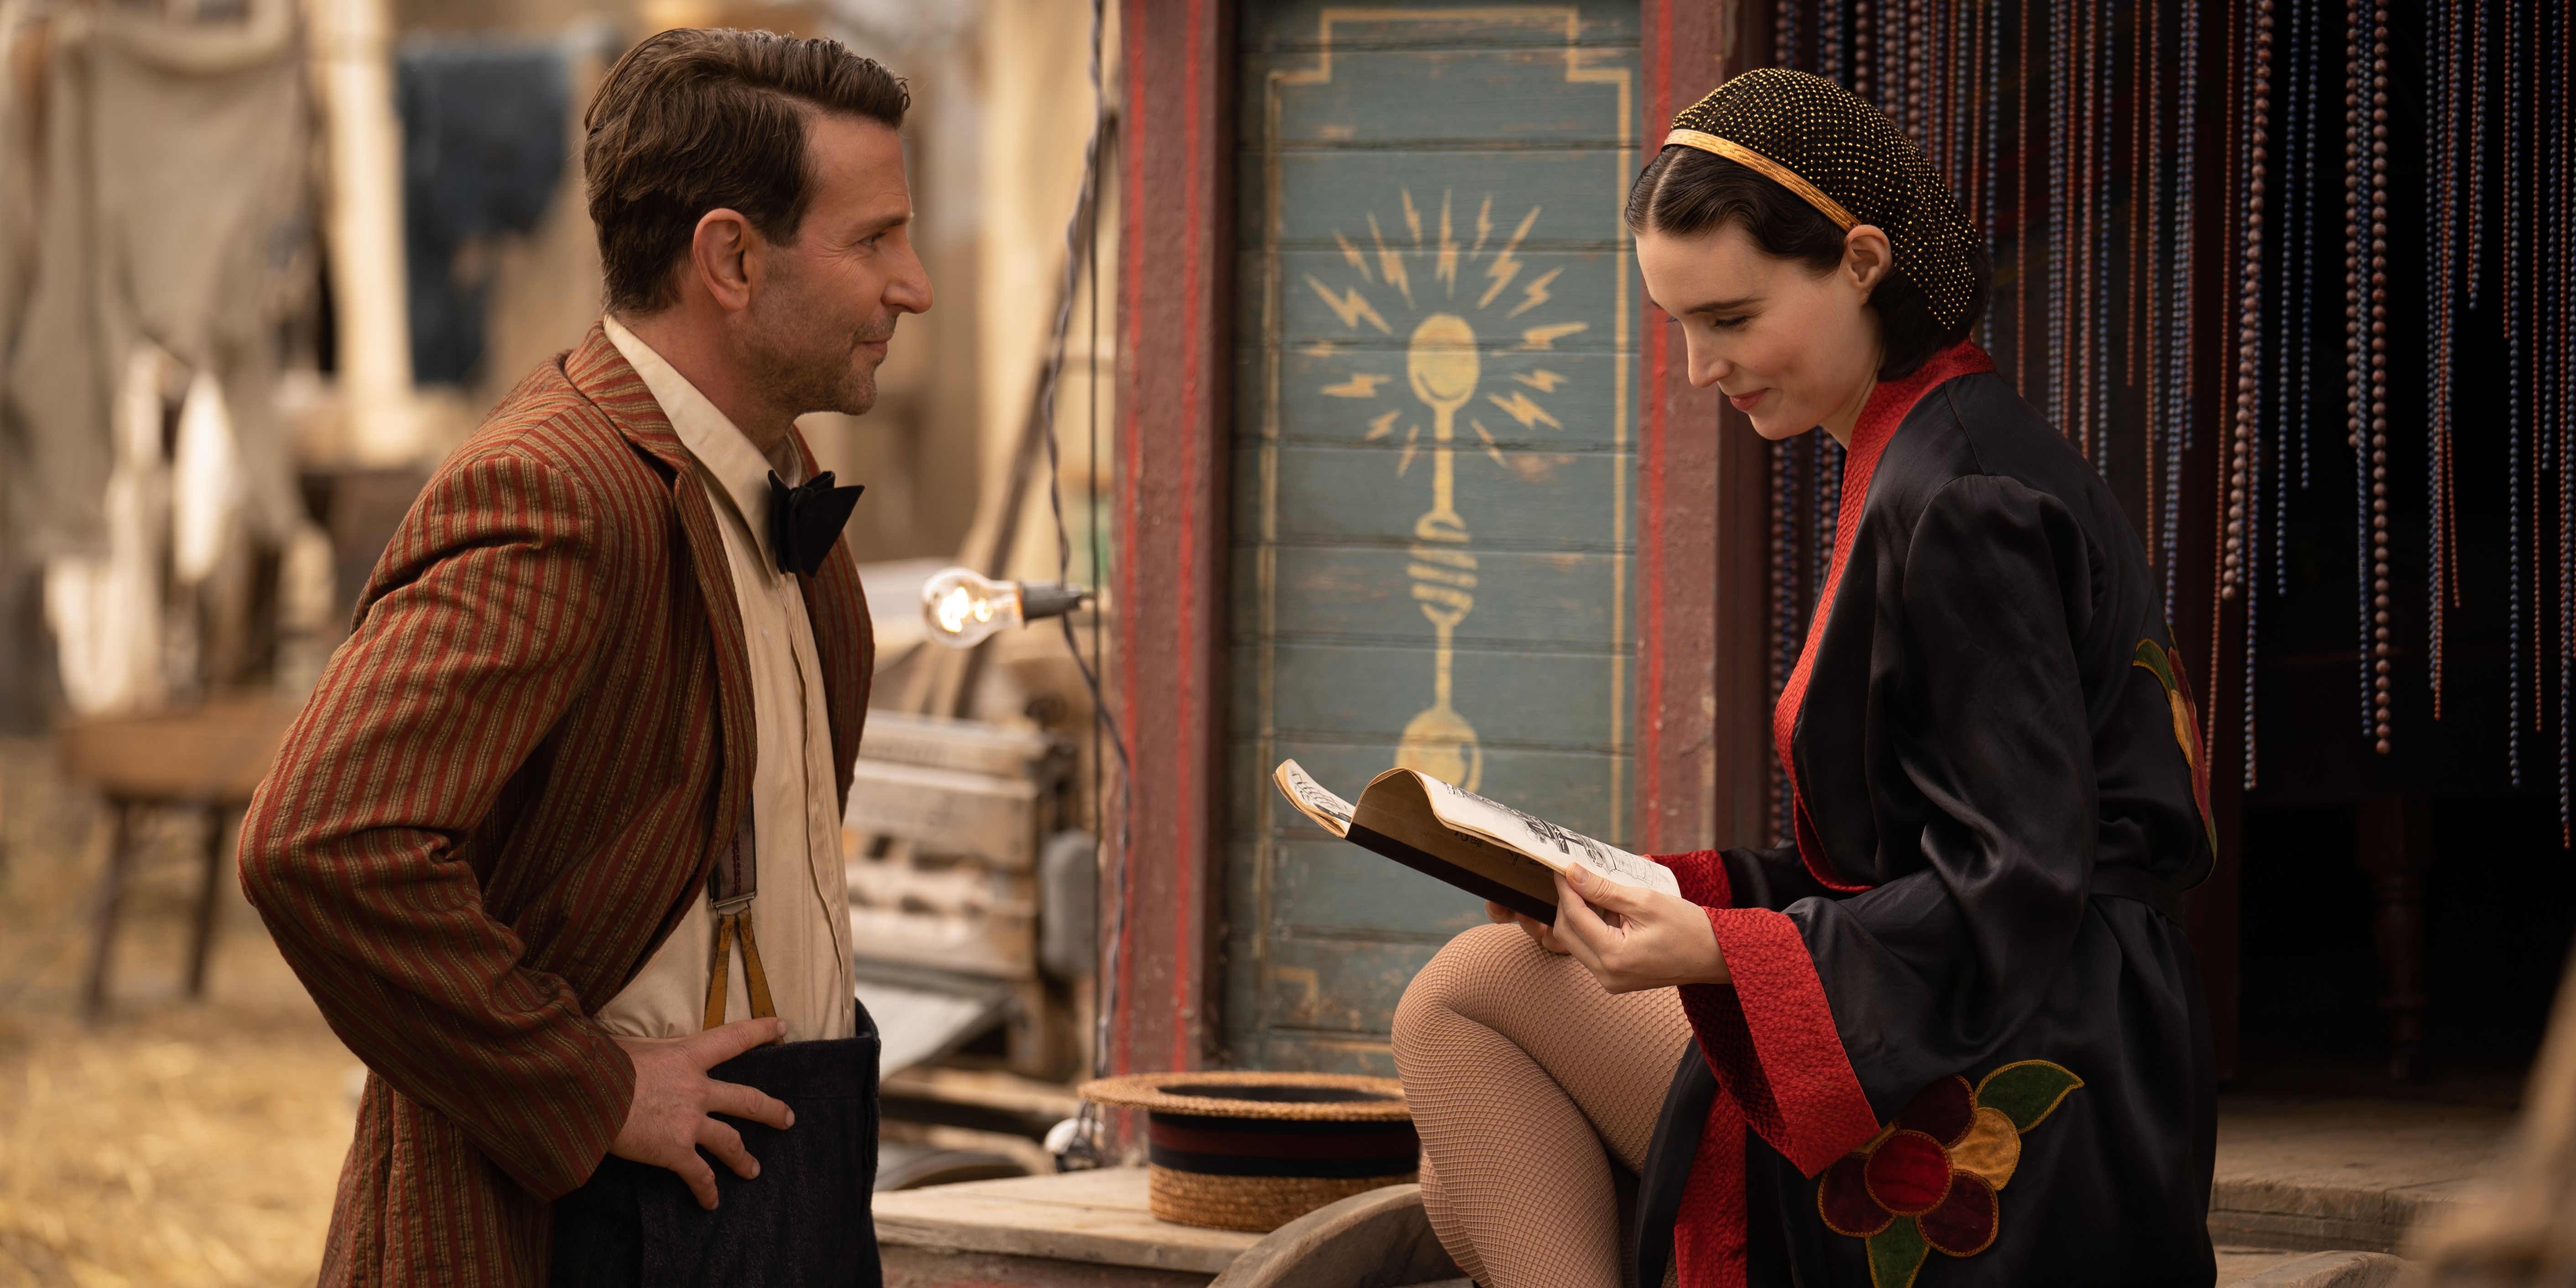 Stan (Bradley Cooper) talks to Molly (Rooney Mara) at her tent in Nightmare Alley